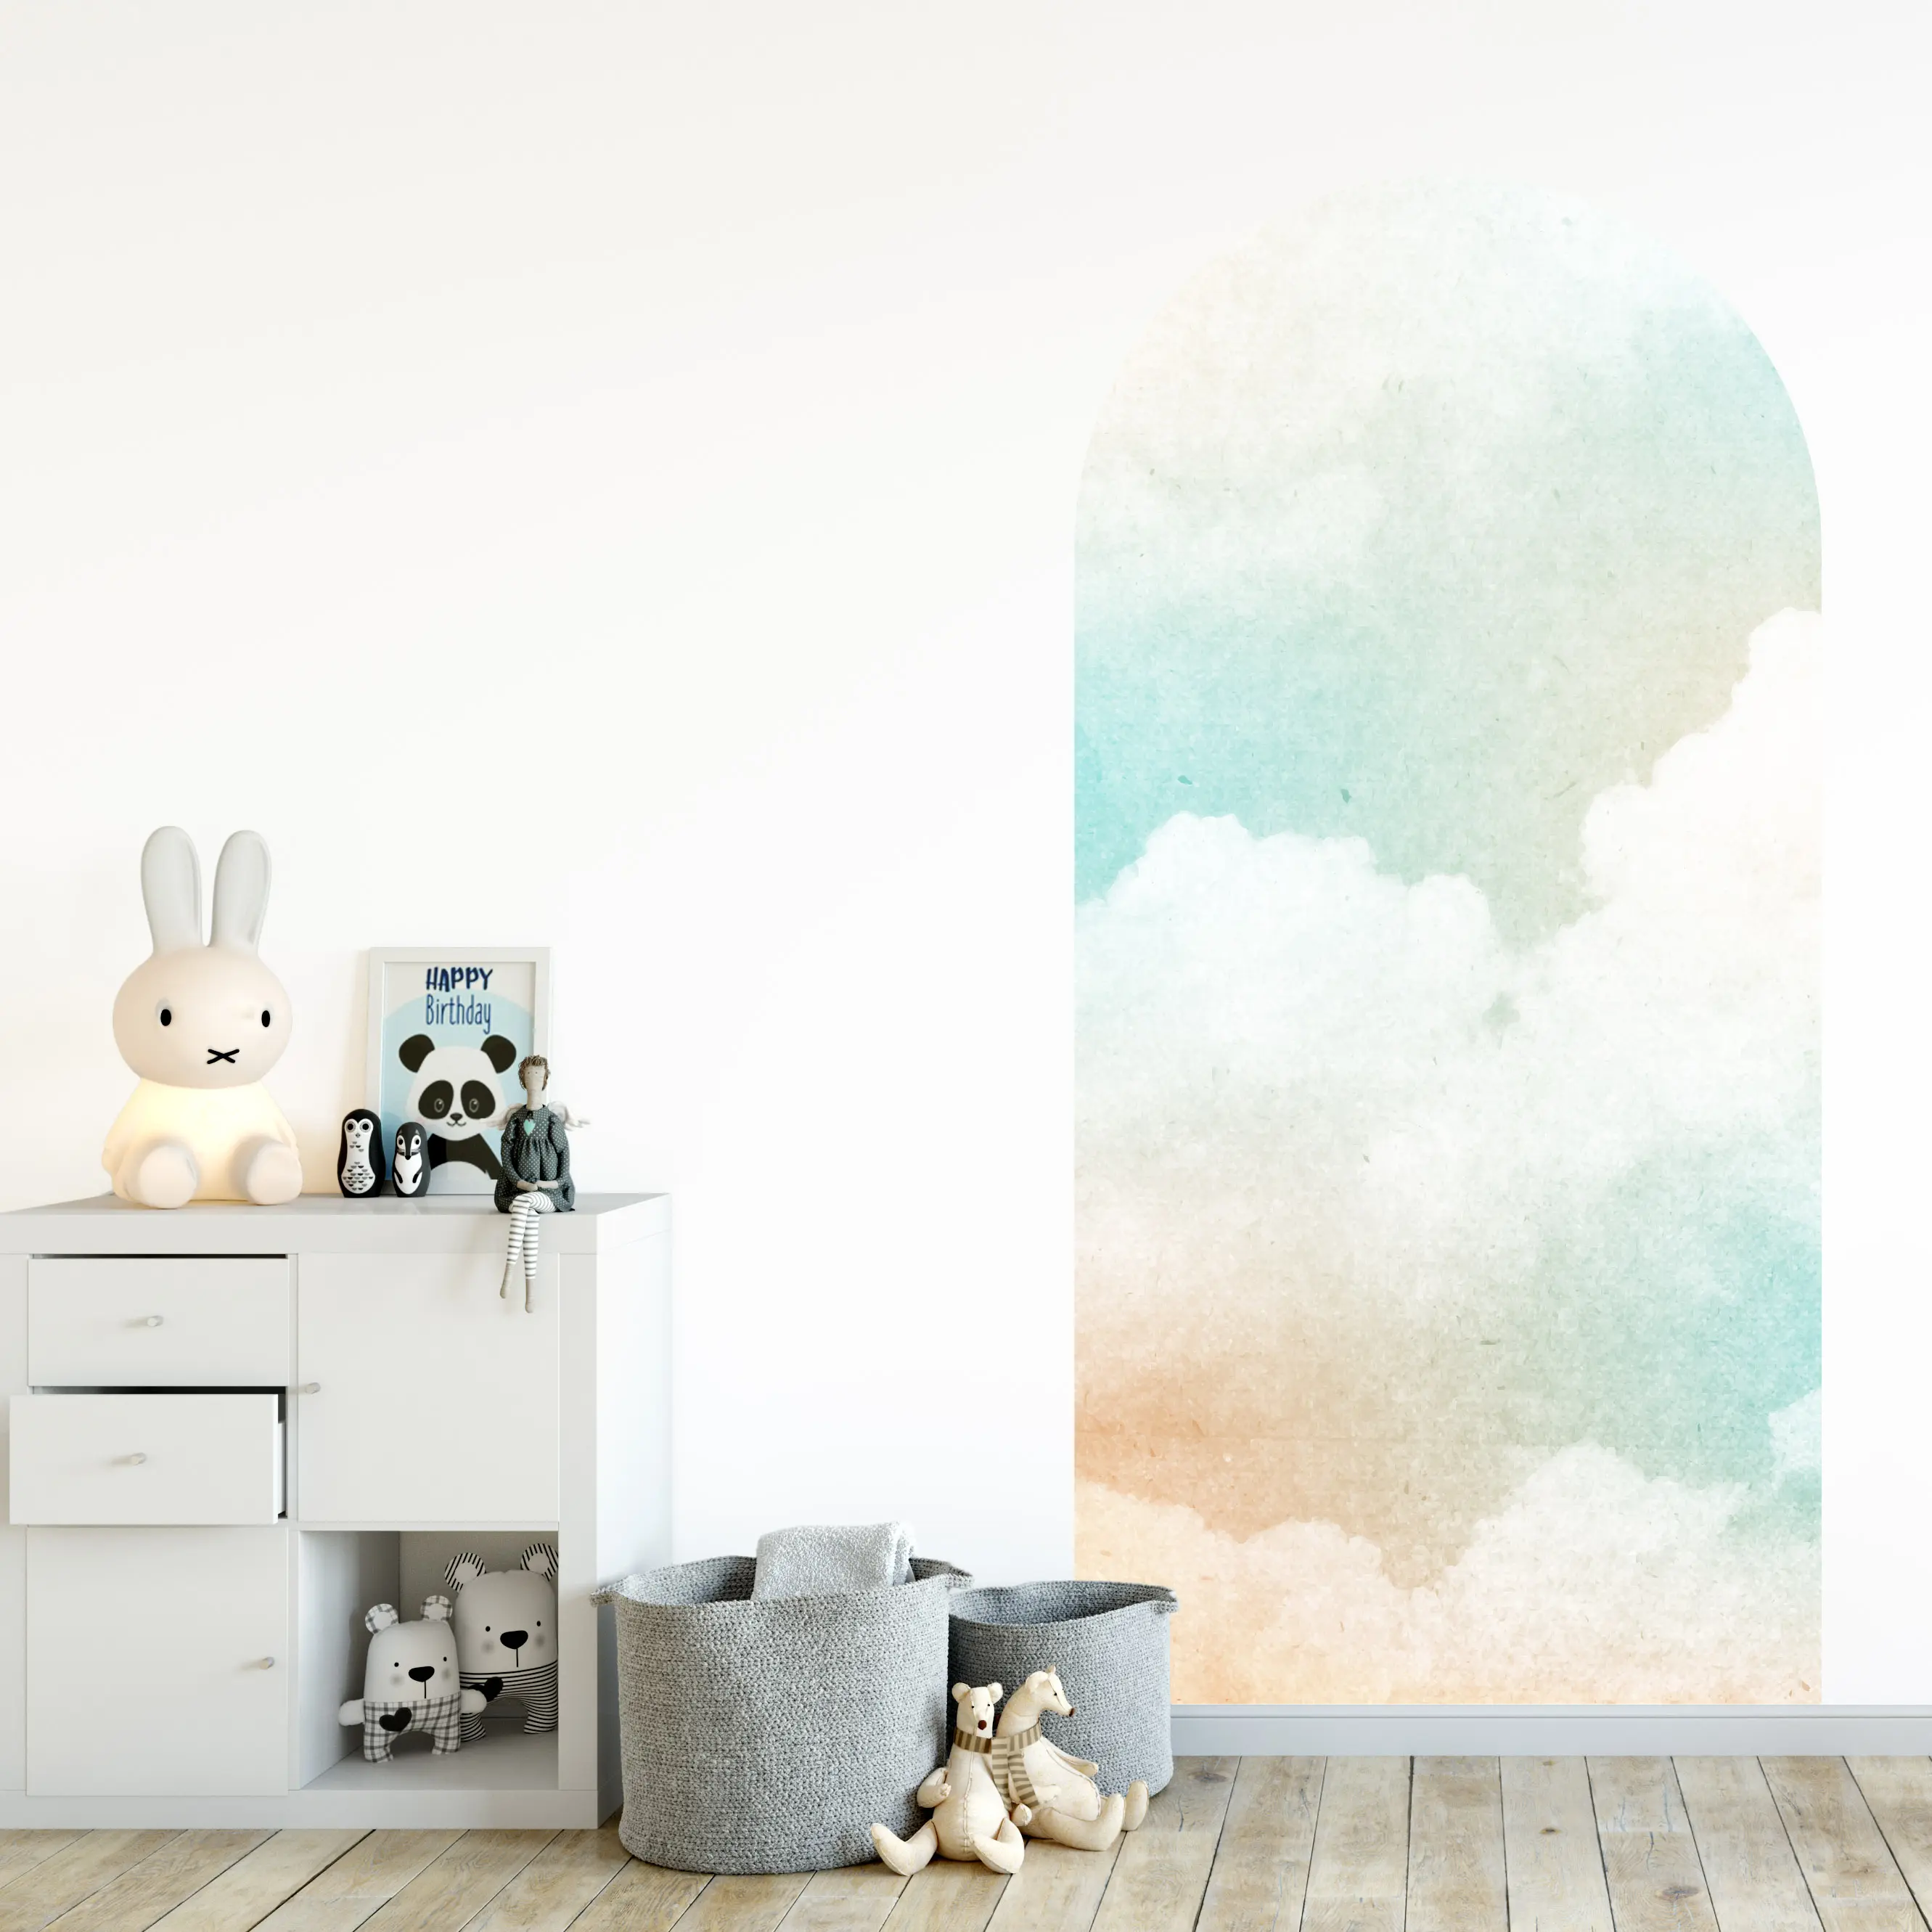 Watercolor Sky Arch Decal Large Arch Headboard Wall Decal Watercolor Clouds Sky Pastel Colors